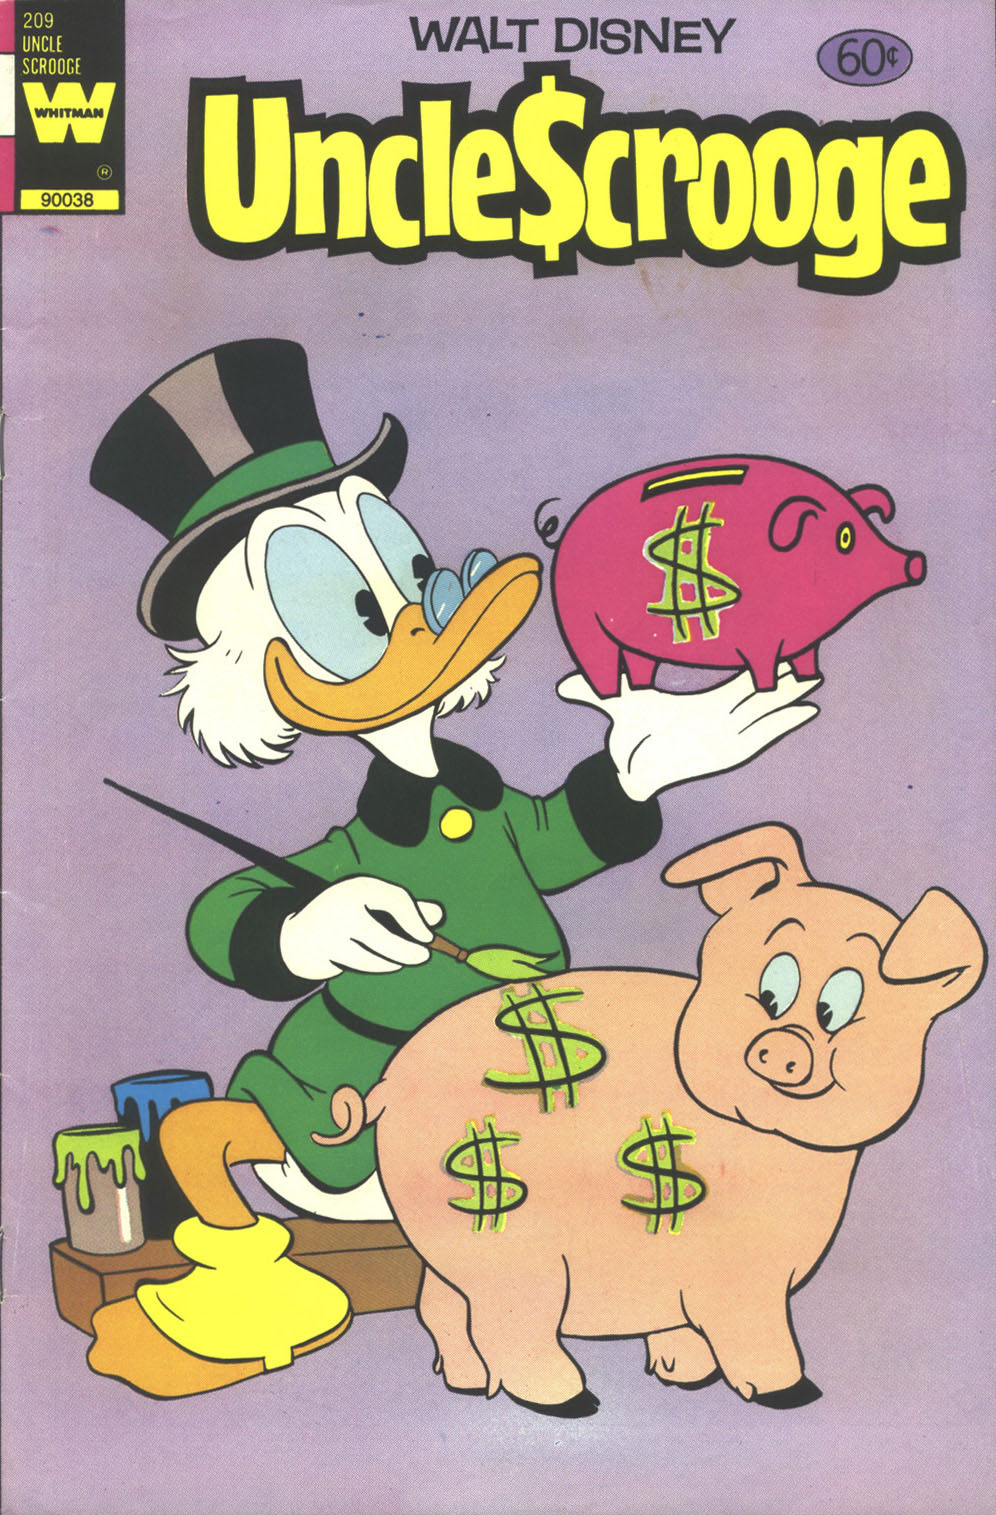 Uncle Scrooge (1953) issue 209 - Page 1